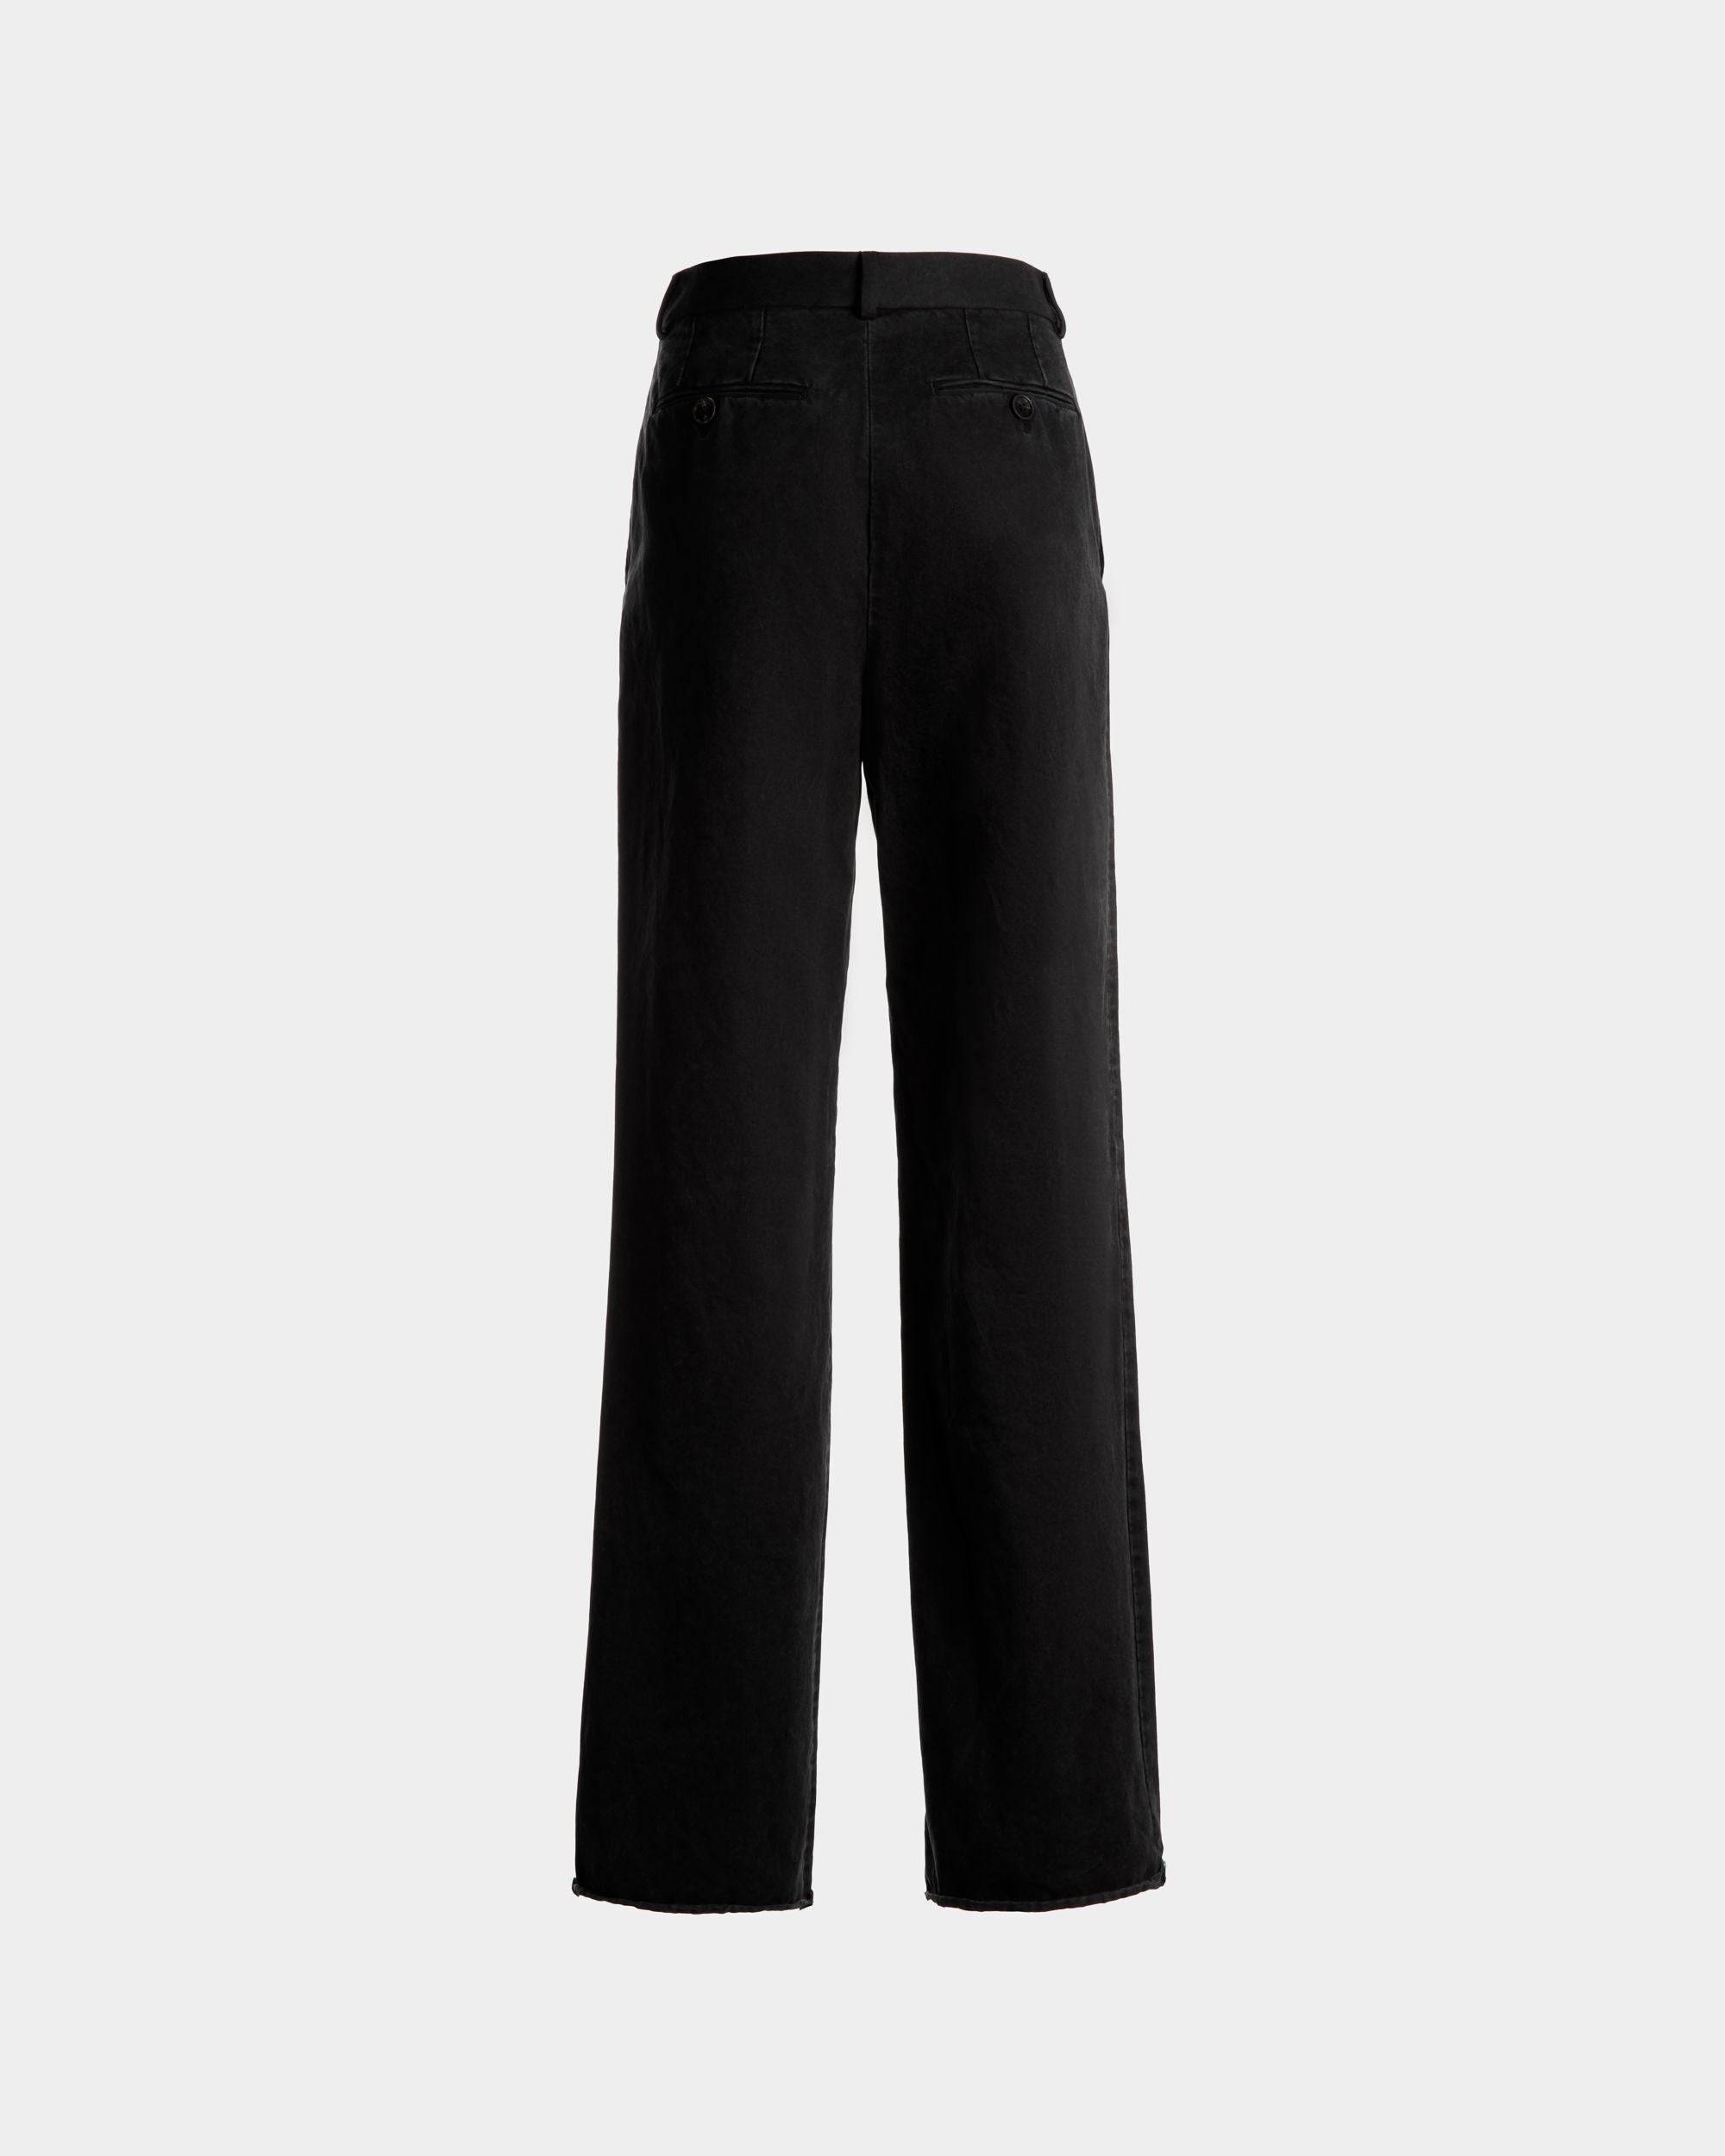 Women's Pleated Pants in Black Washed Cotton | Bally | Still Life Back